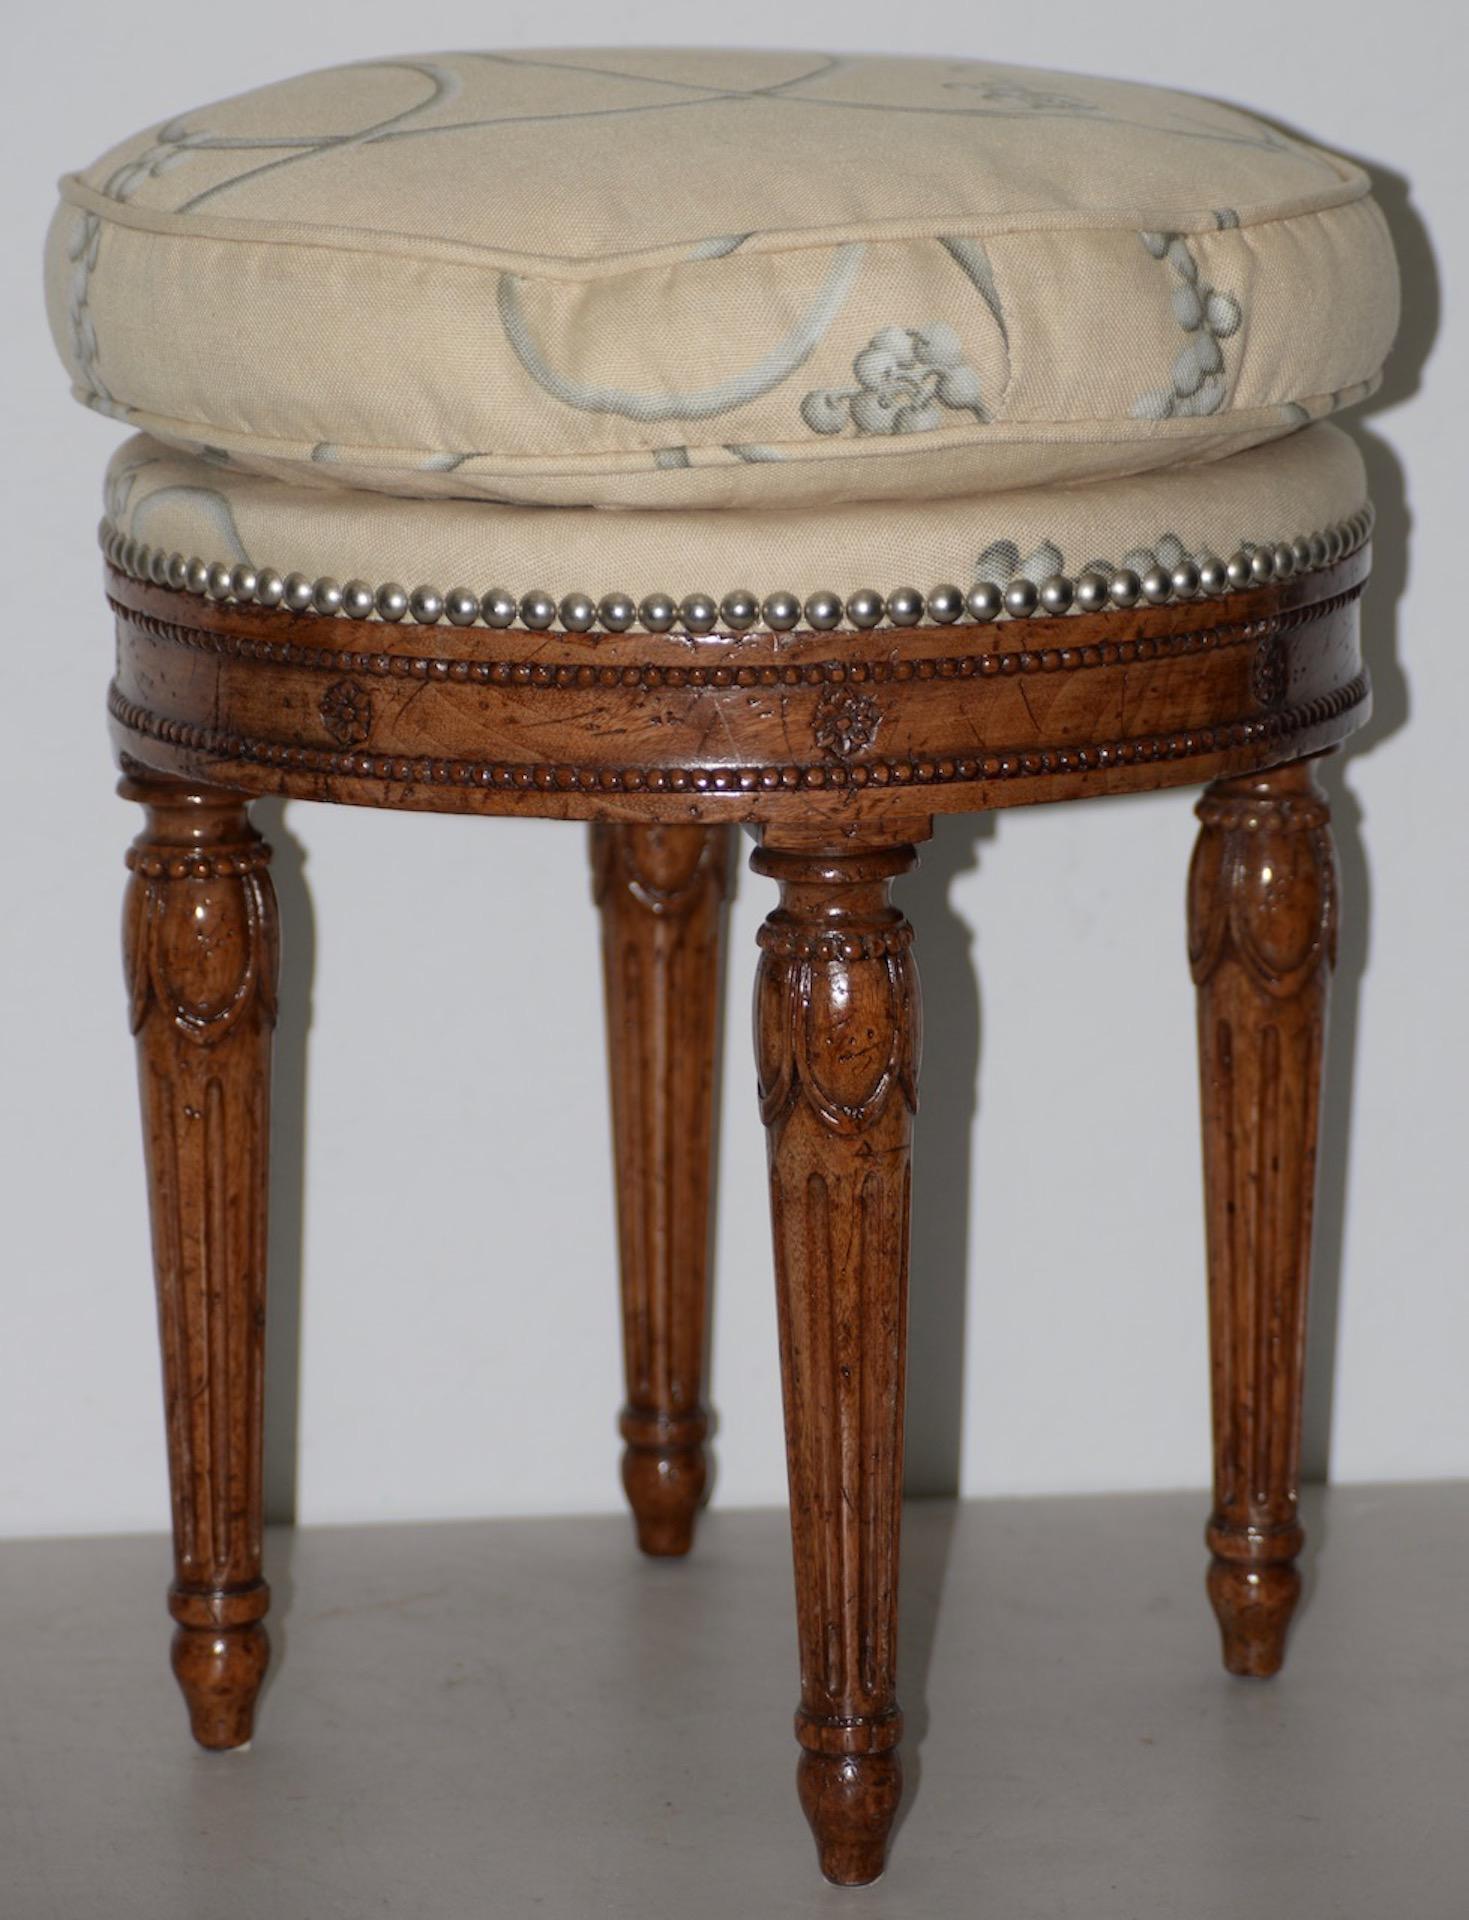 Early 20th century carved French walnut round seat

Beautifully carved glazed walnut seat with four legs. The cotton upholstery is filled with down.

Solid, sturdy and comfortable.

Dimensions: 16